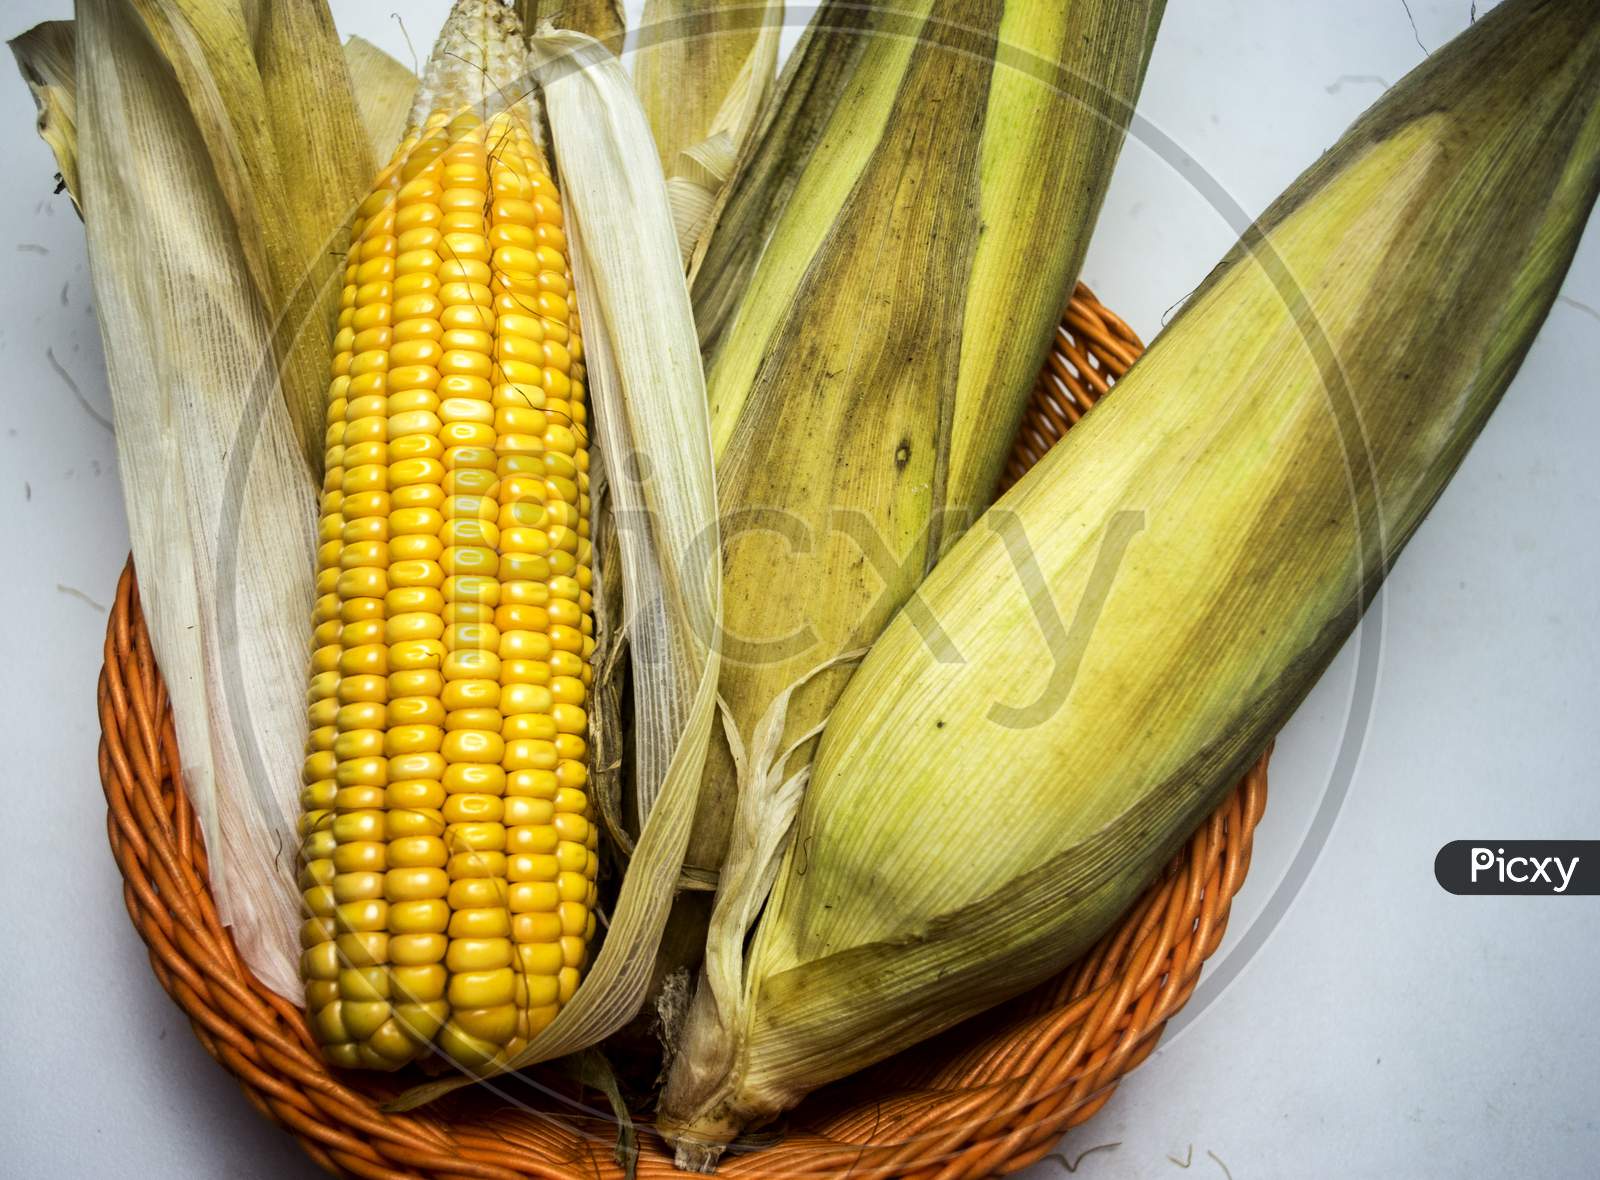 Raw Sweet Corn On Blurred Background With Dried Leaves